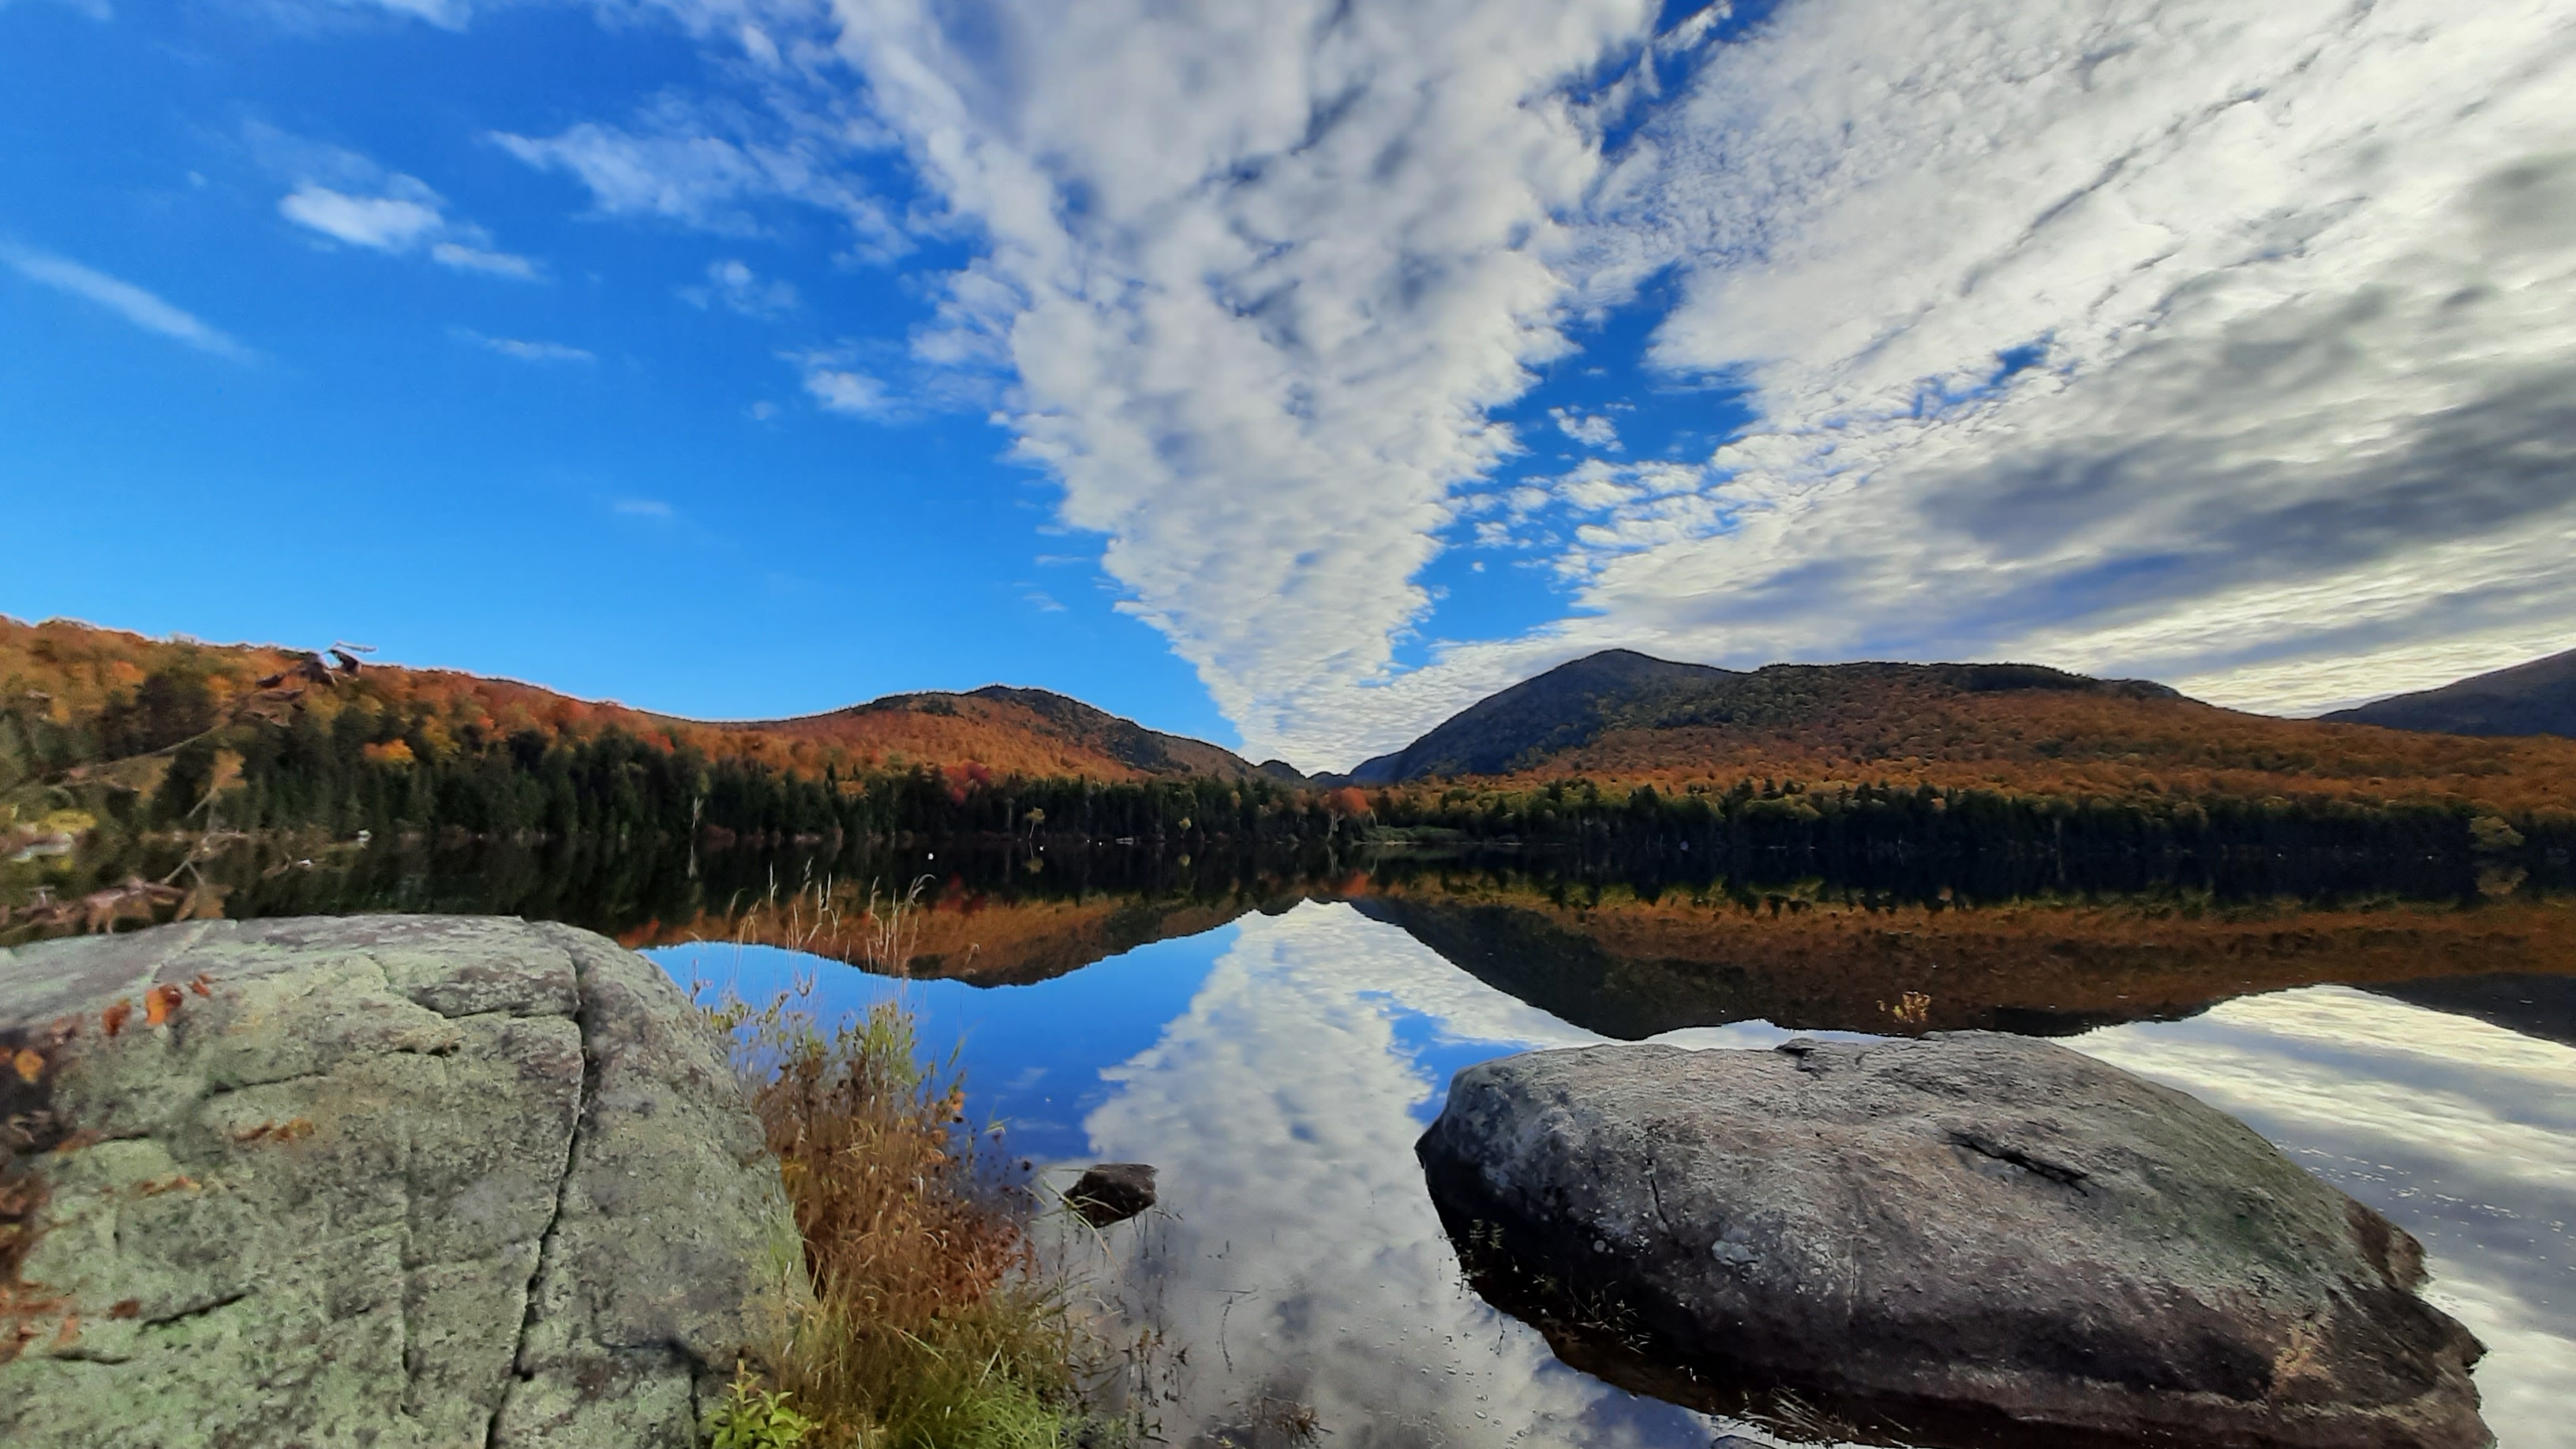 A peaceful lake in the Adirondacks during peak fall foliage with wispy clouds in a bright blue sky